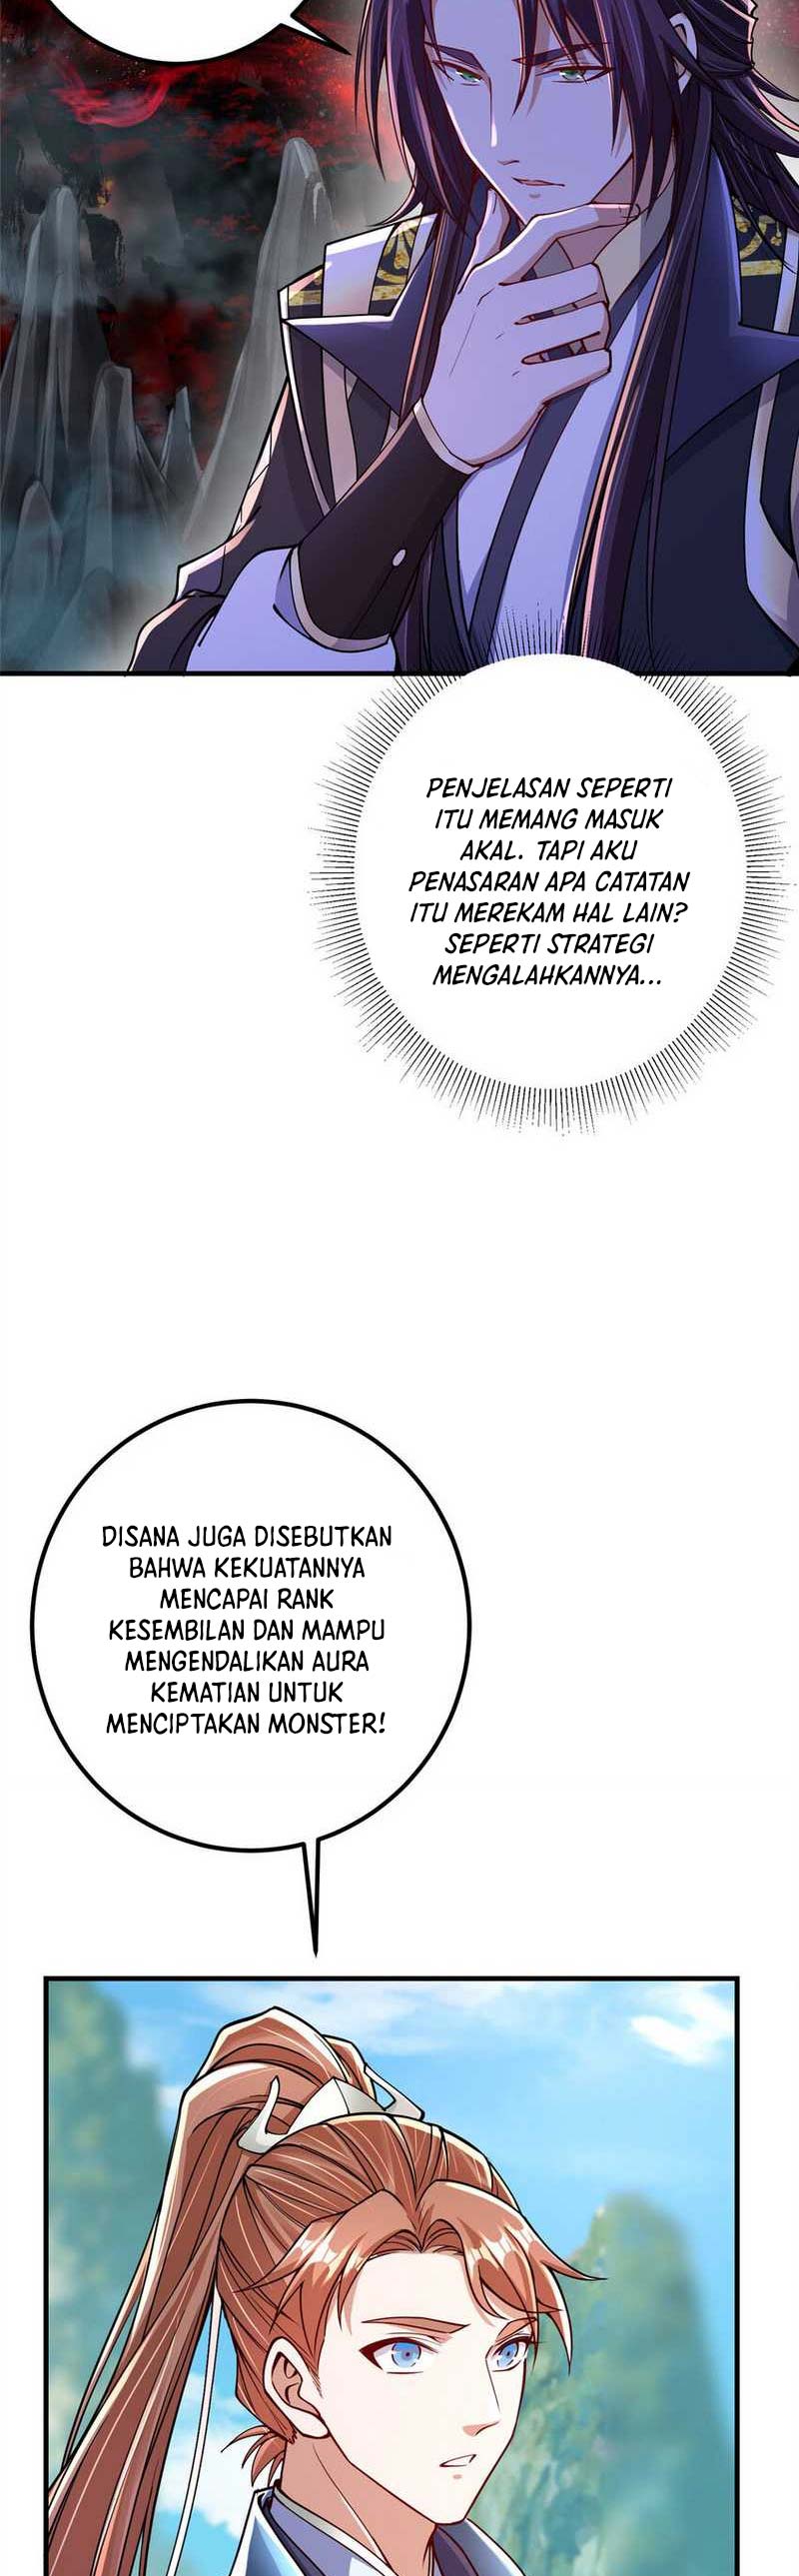 Keep A Low Profile, Sect Leader Chapter 192 Bahasa Indonesia